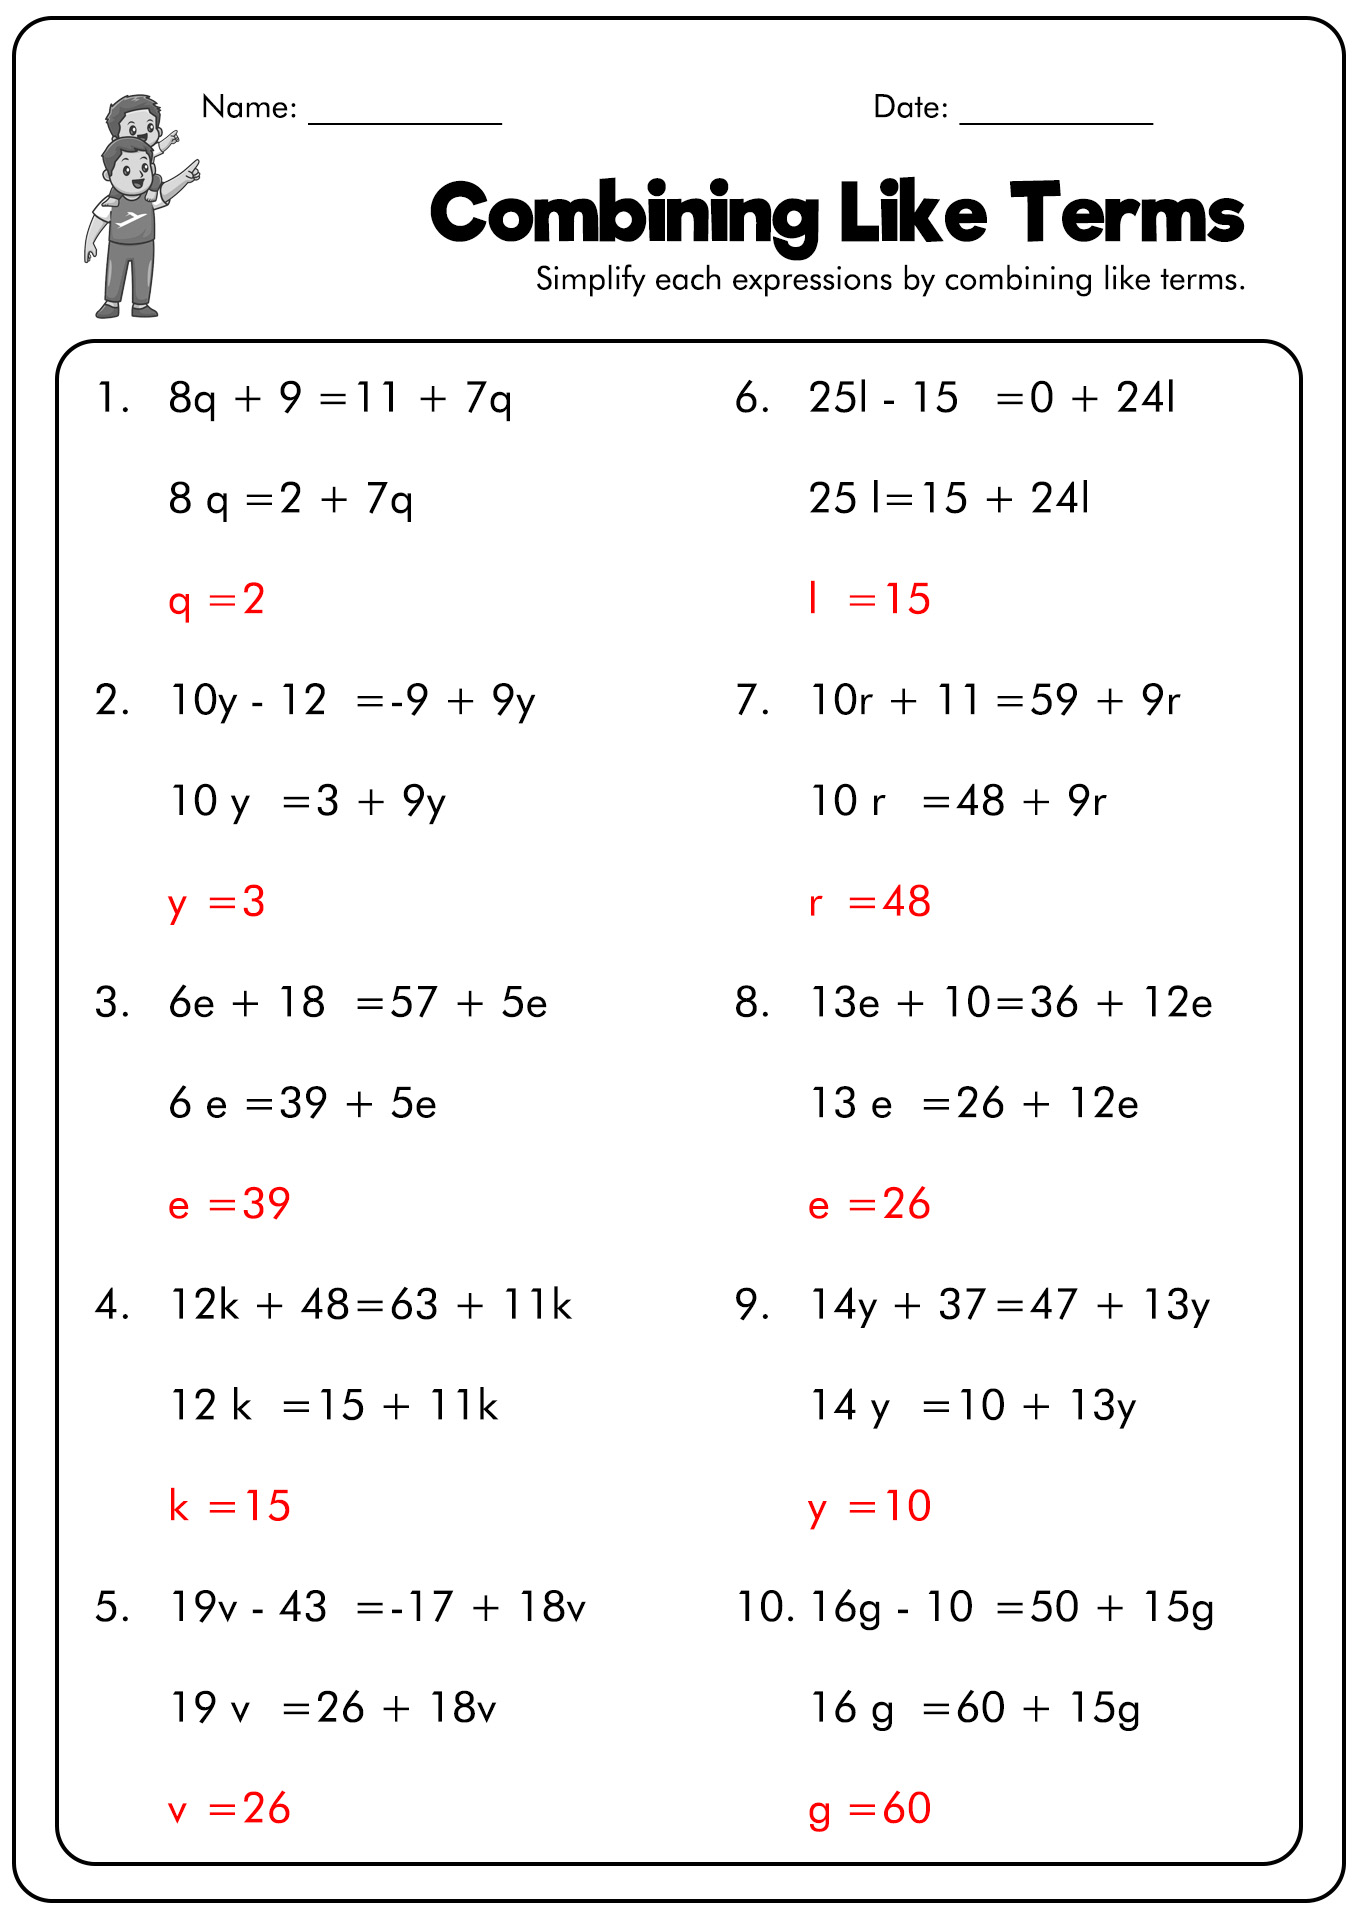 32-combining-like-terms-worksheet-answers-worksheet-project-list